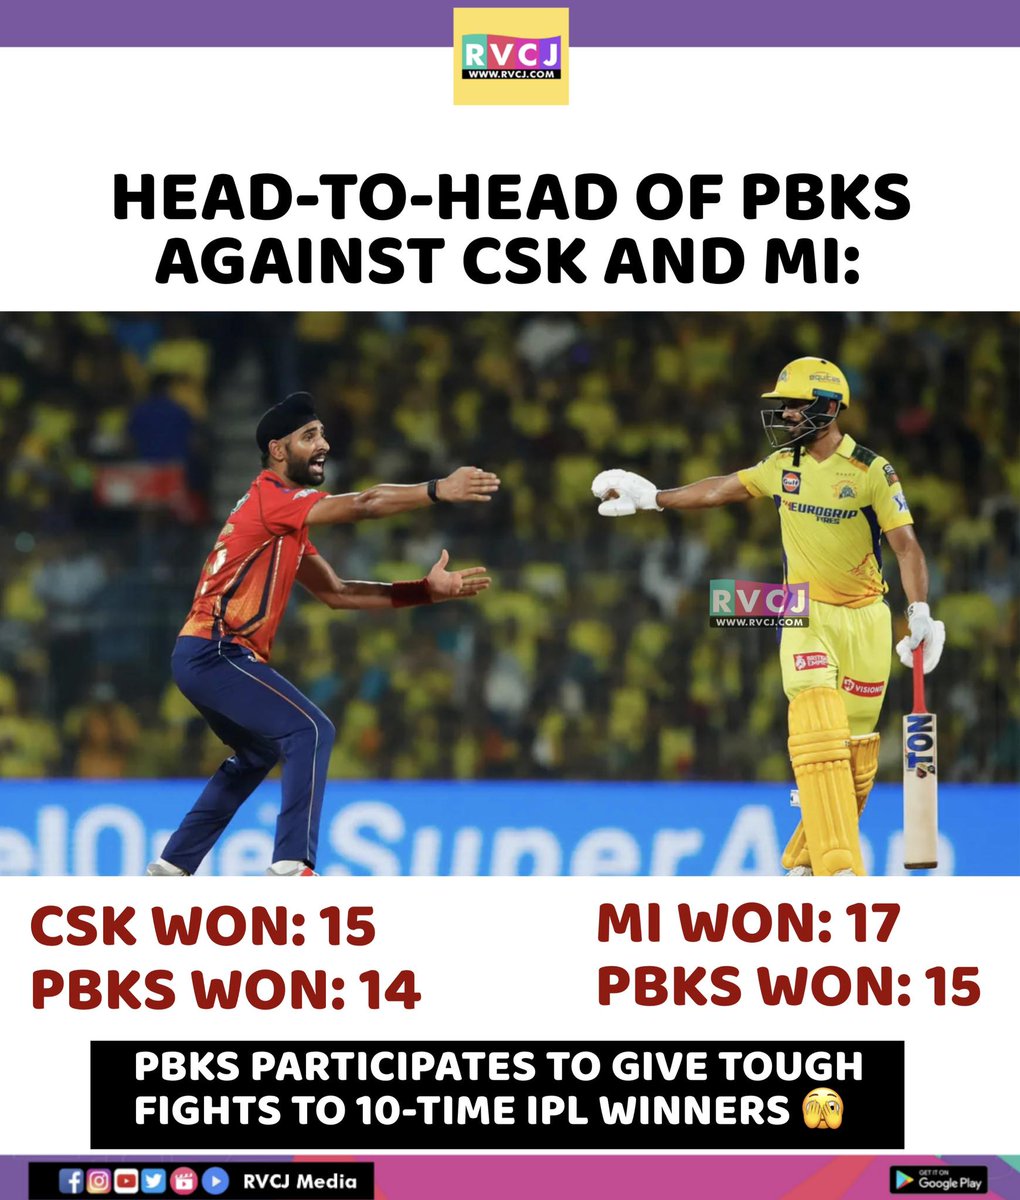 Head-To-Head of PBKS Against CSK And MI